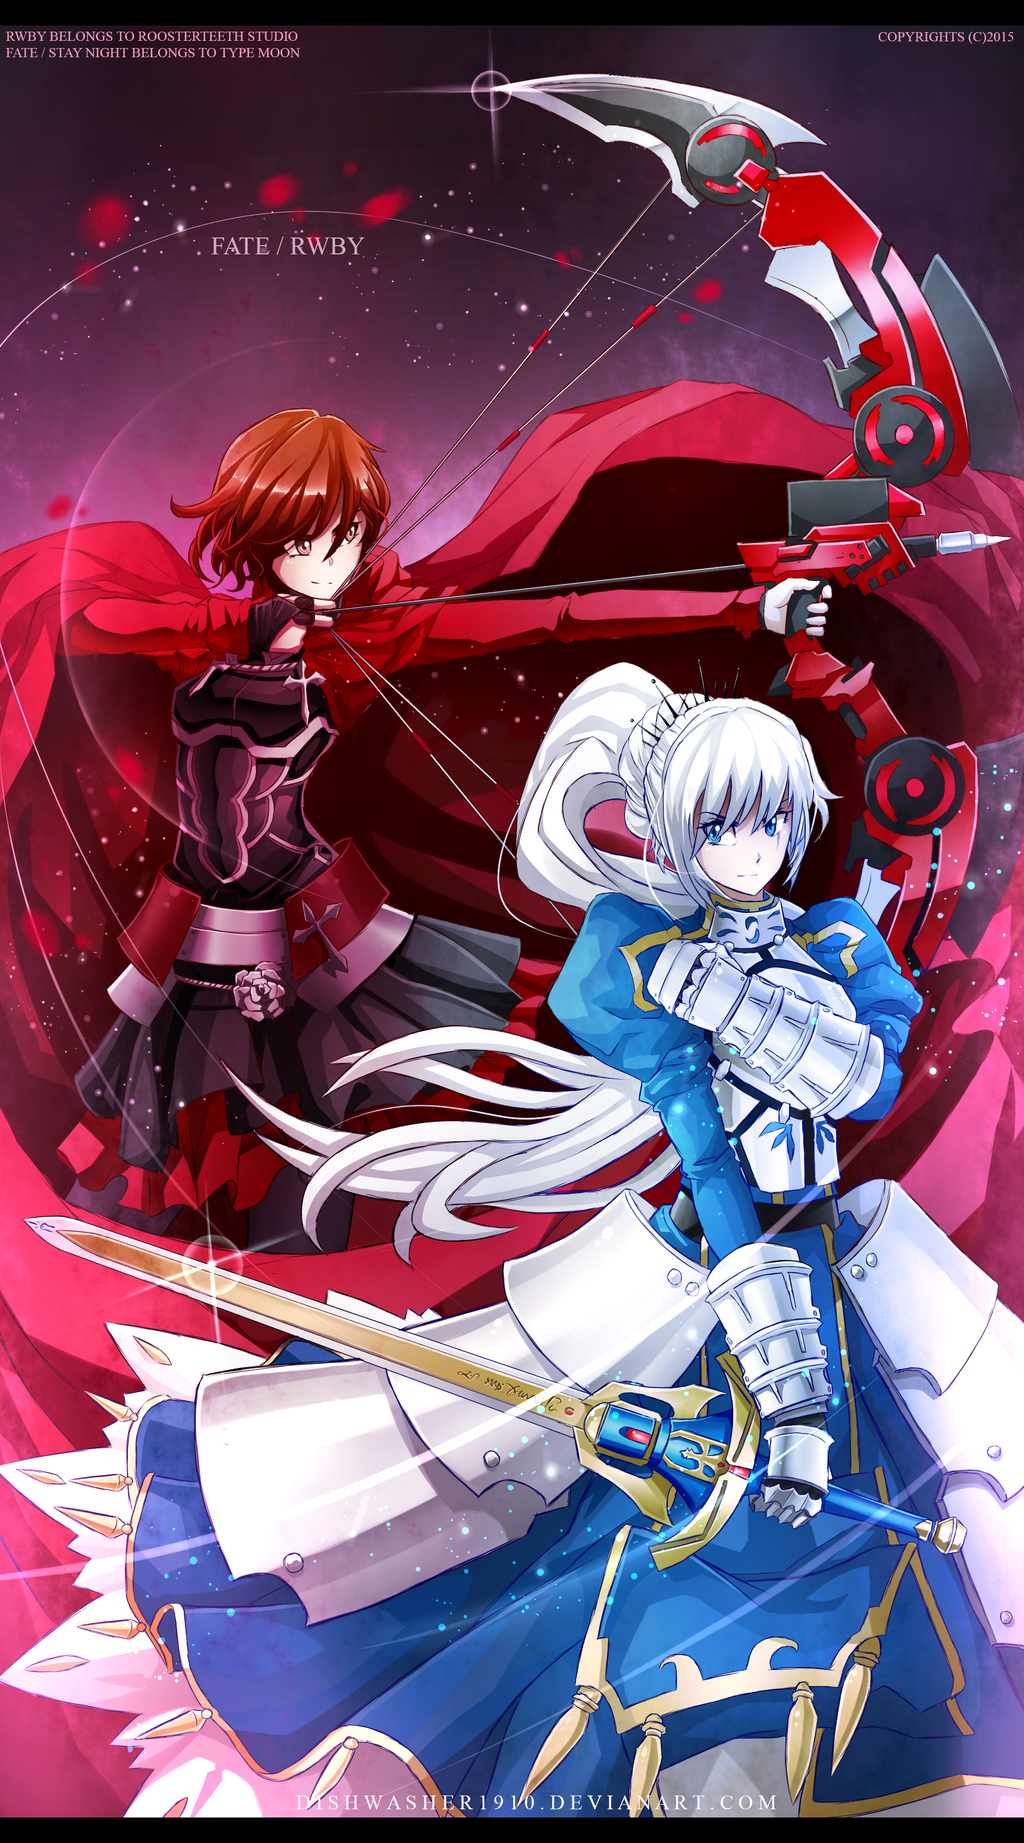 Fate/Stay Night x RWBY : White Saber/Red Archer by dishwasher1910 on